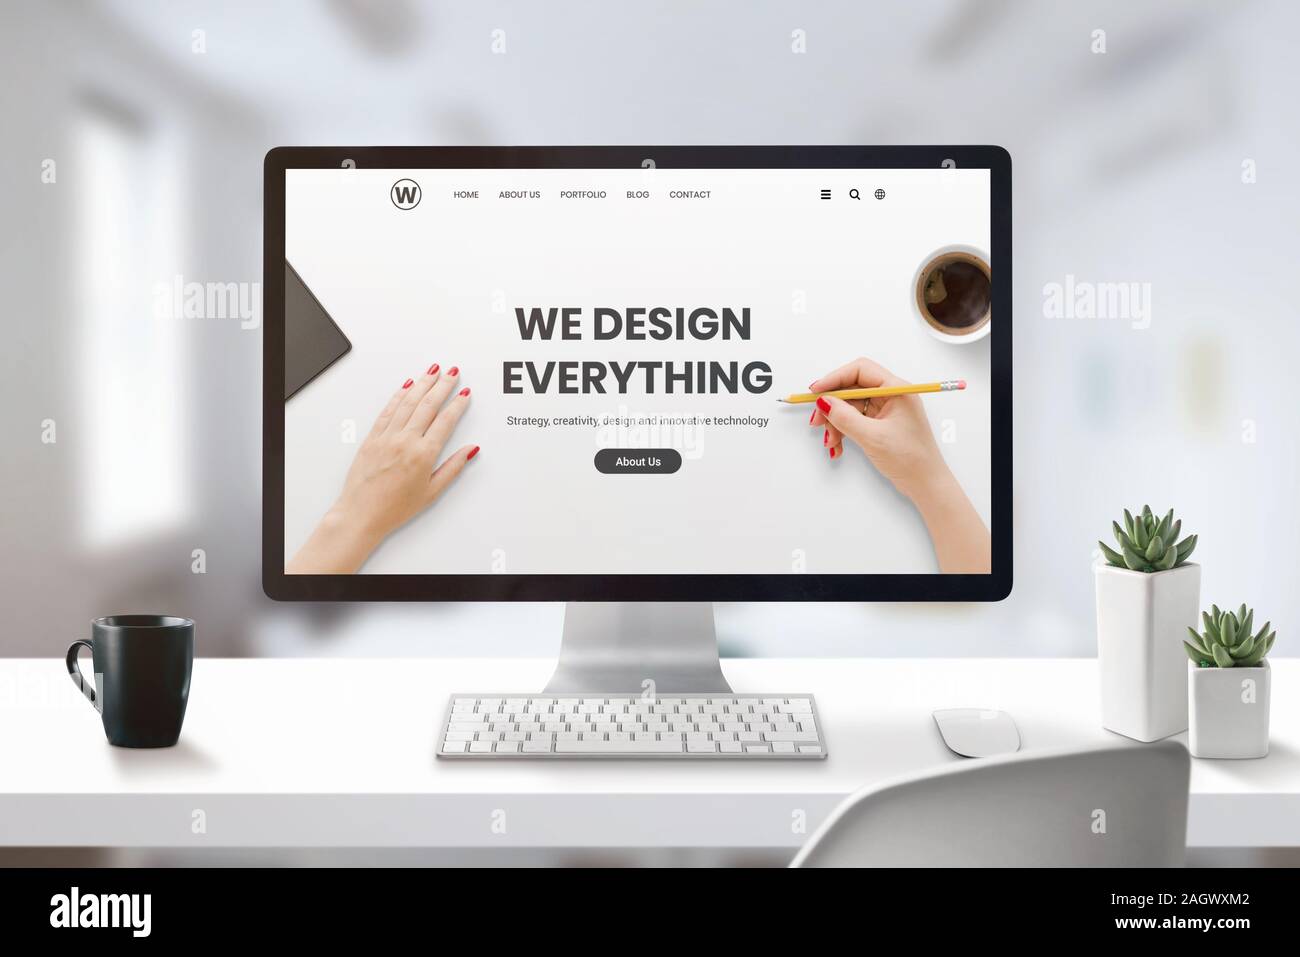 Web design studio concept with modern agency web page on computer display. Office, studio desk with cup of coffee and plants beside Stock Photo